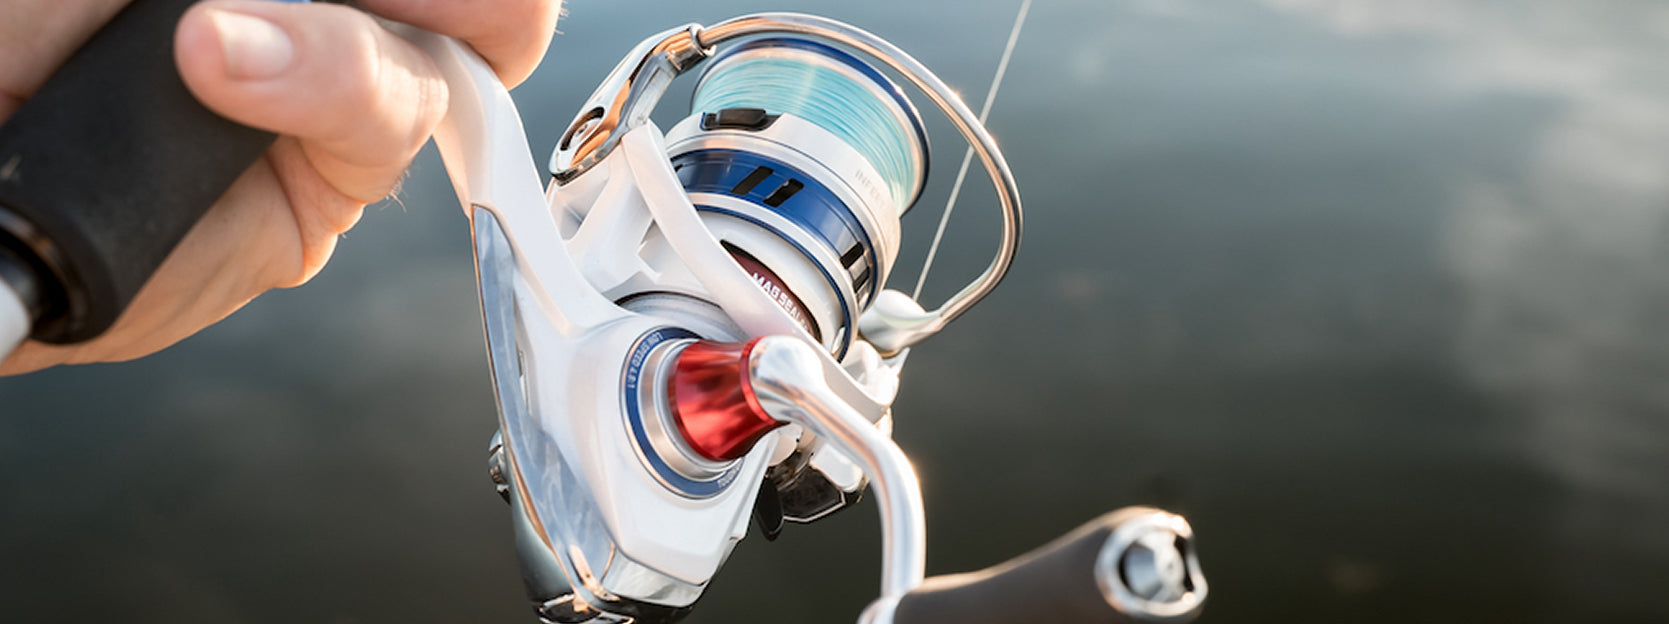 HOW TO: Spool BRAIDED LINE on SPINNING REELS! -- Why You SHOULD